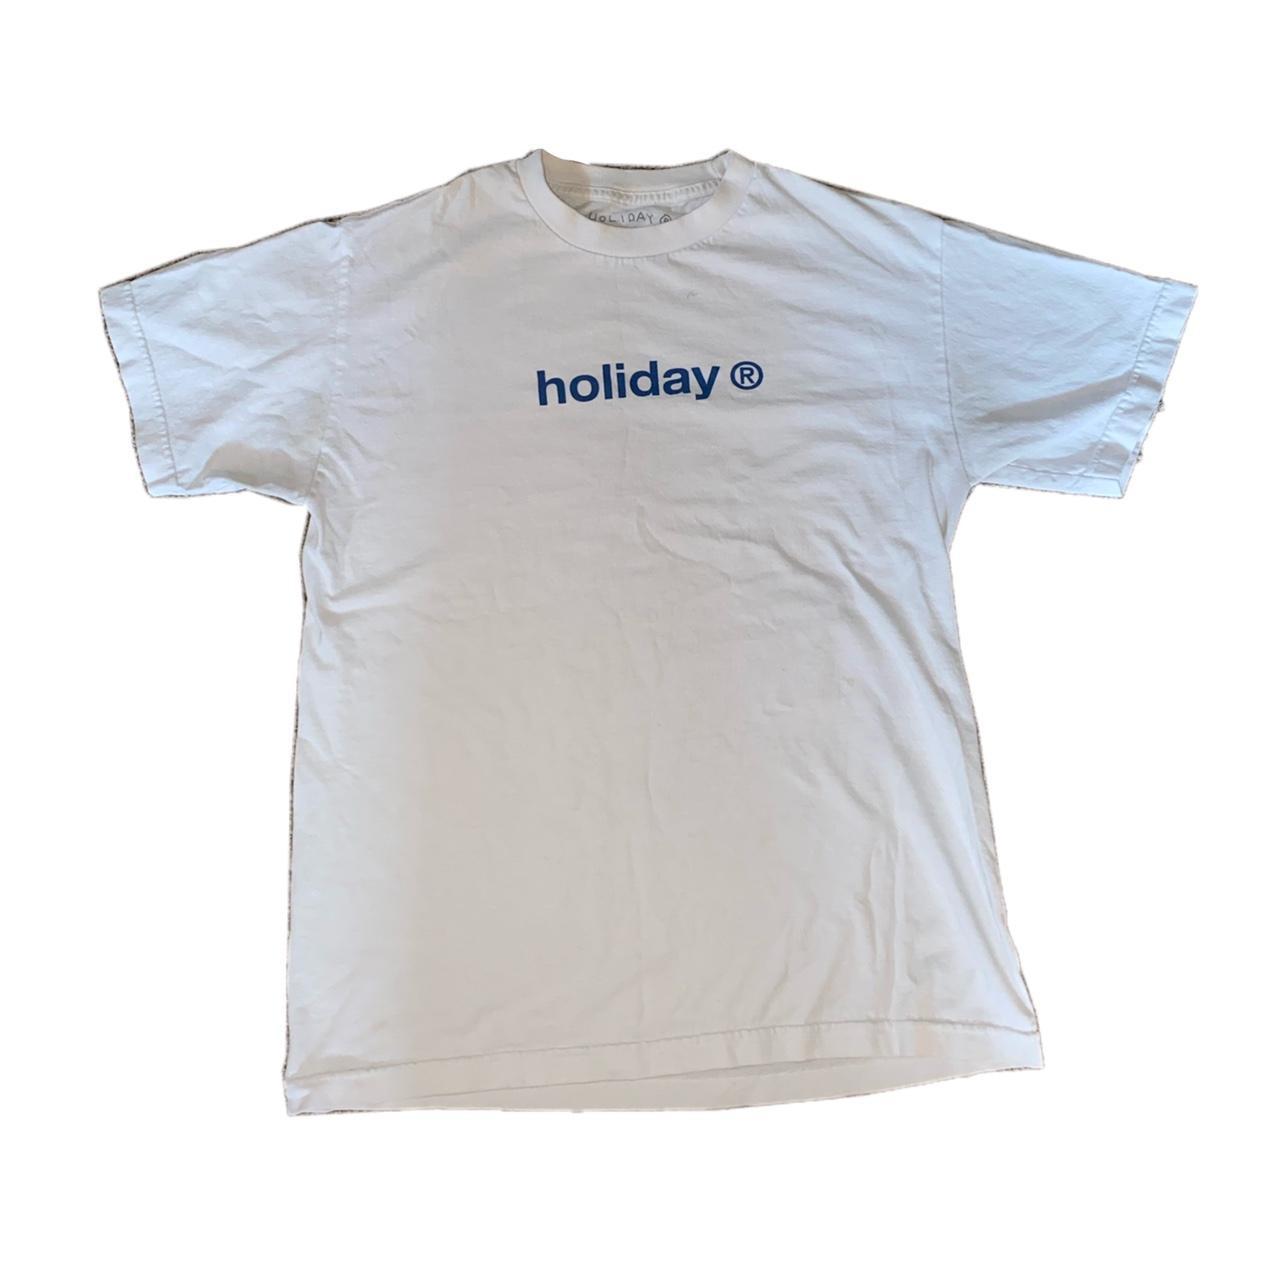 Holiday The Label Men's White T-shirt